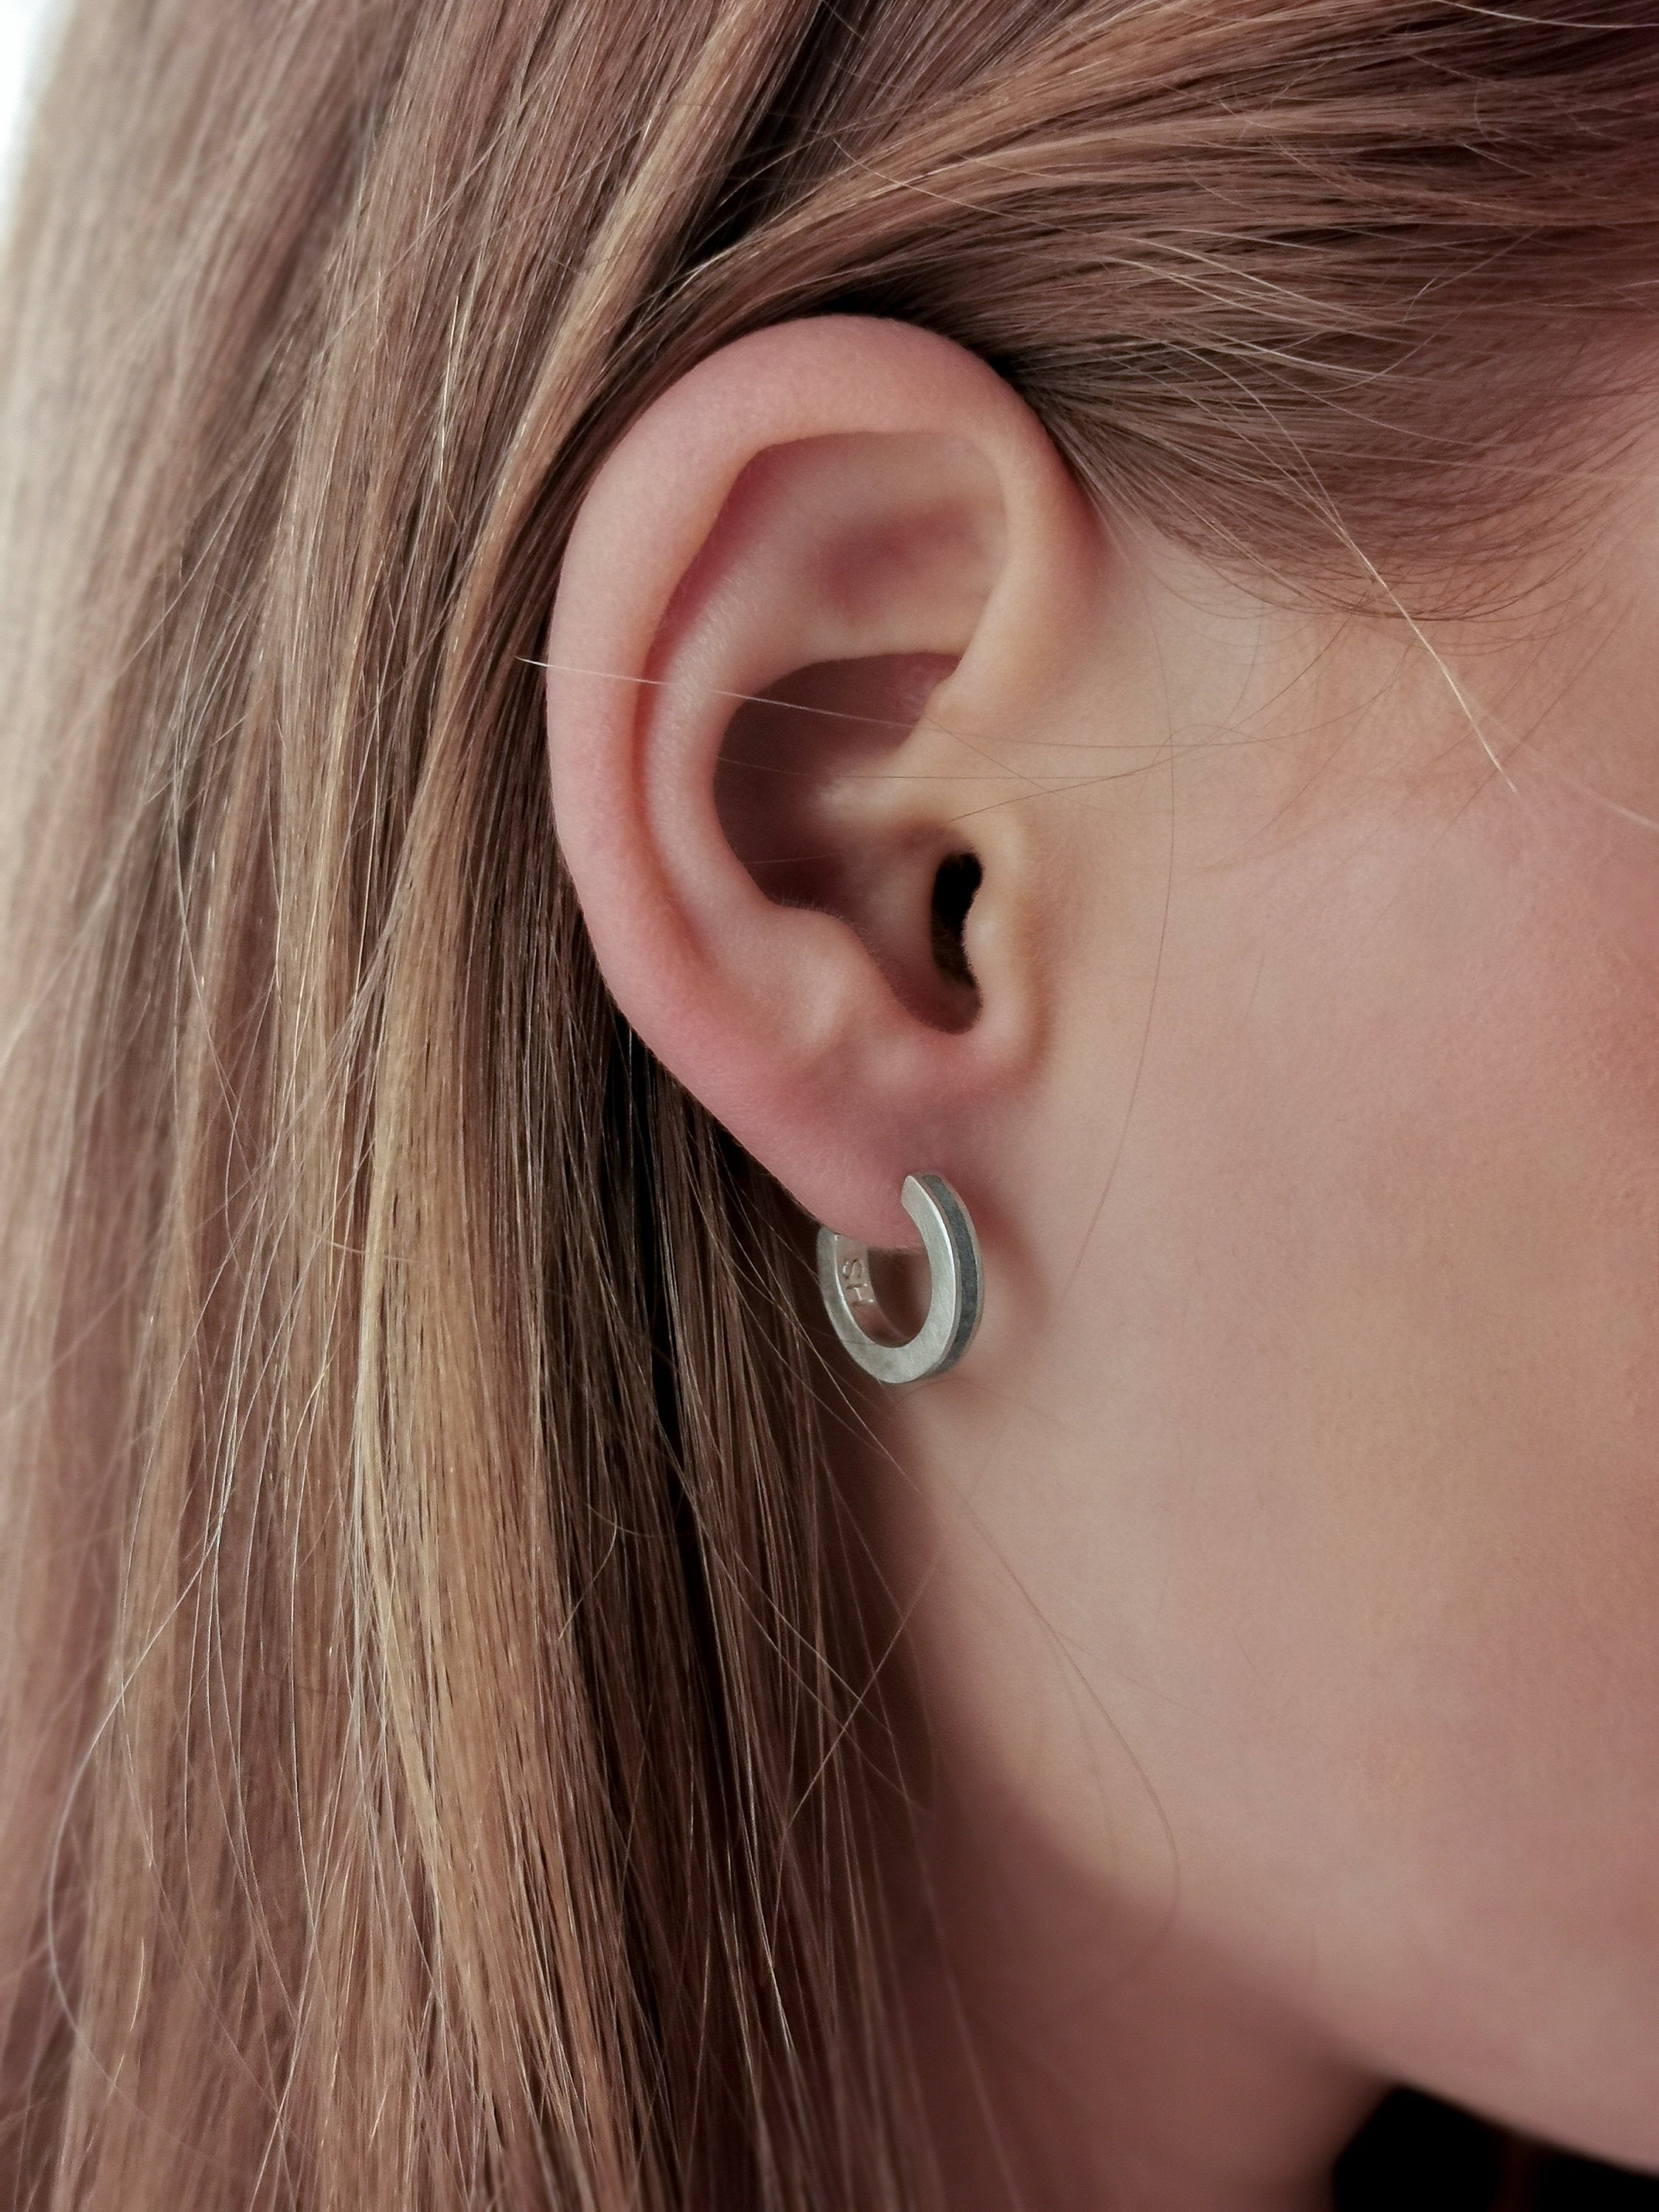 Contemporary Minimalist Silver & Concrete Small Hoop Earrings - hs